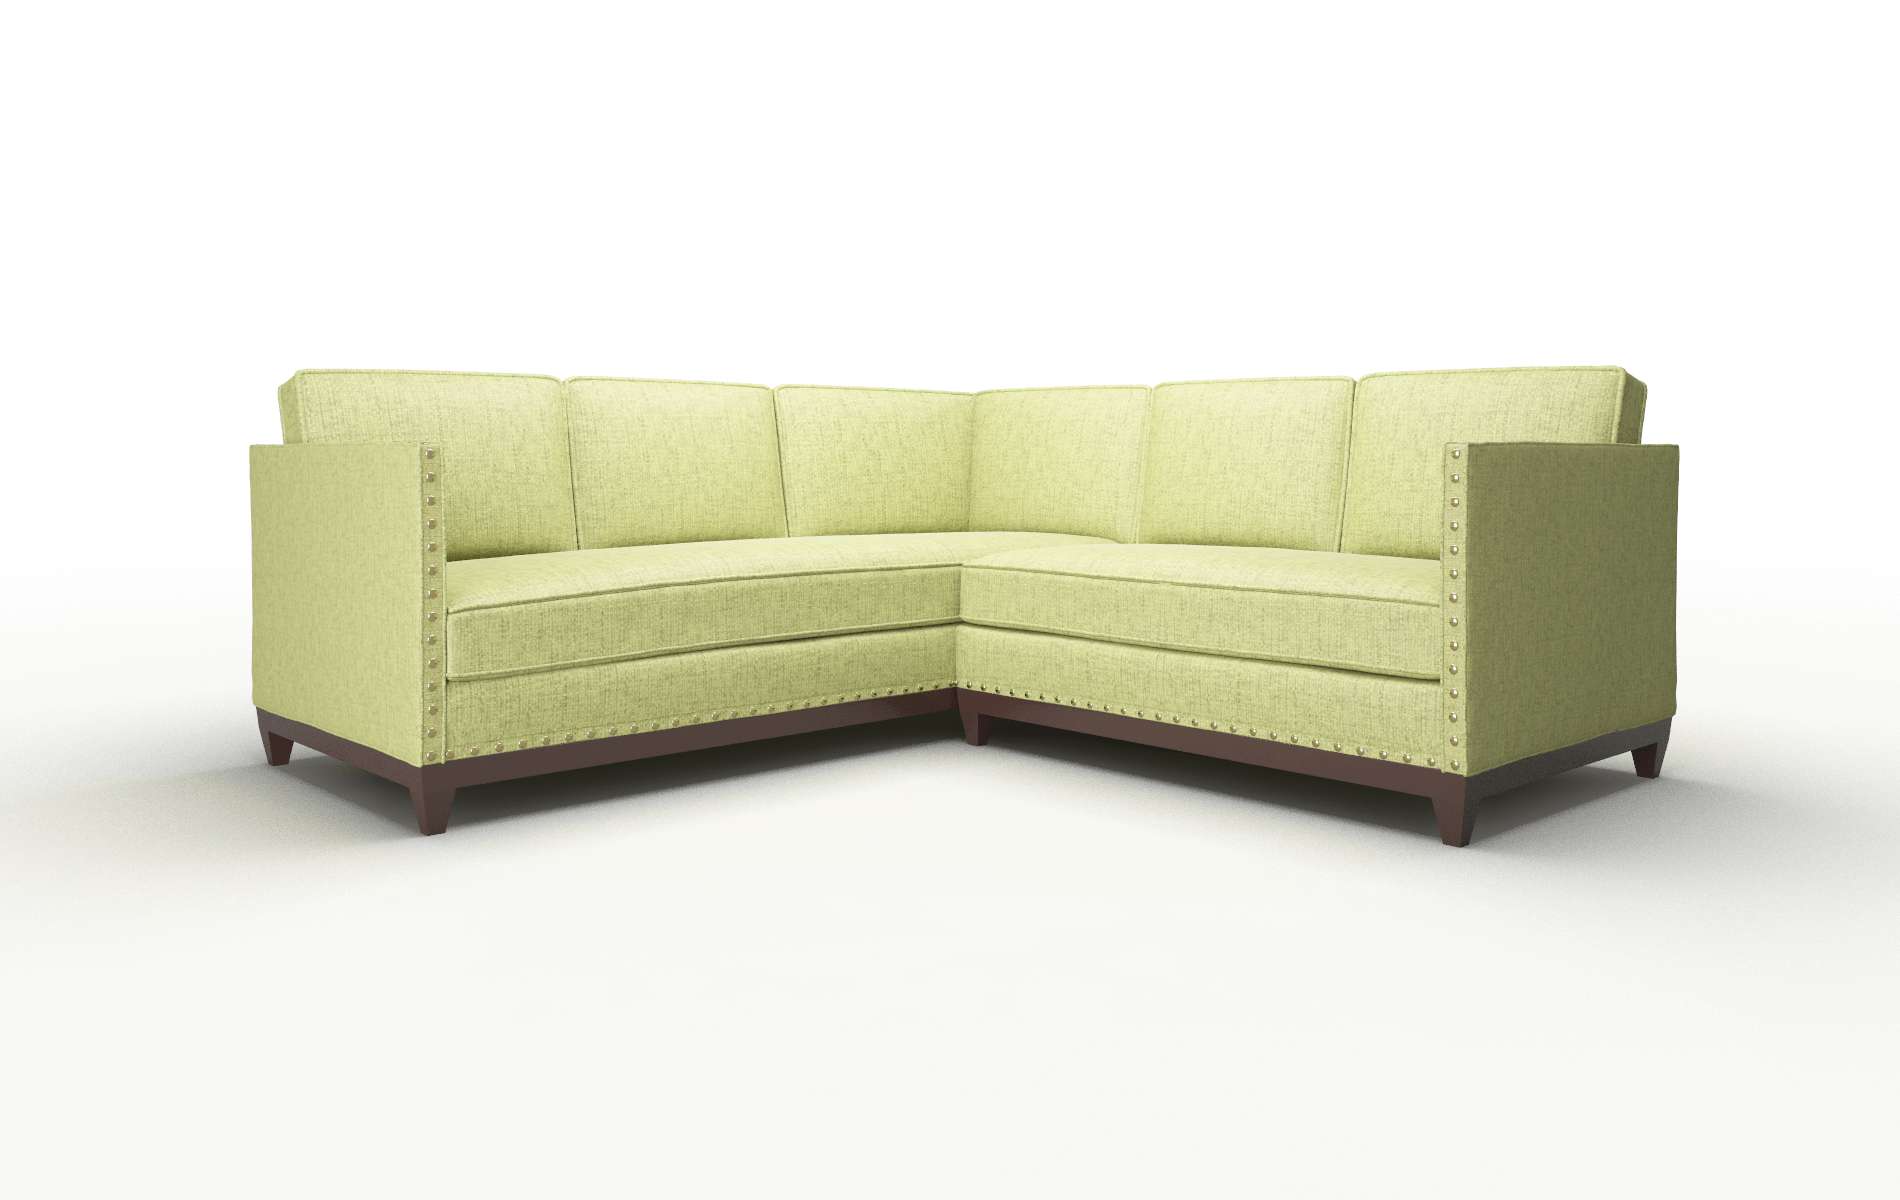 Florence Notion Appletini Sectional espresso legs